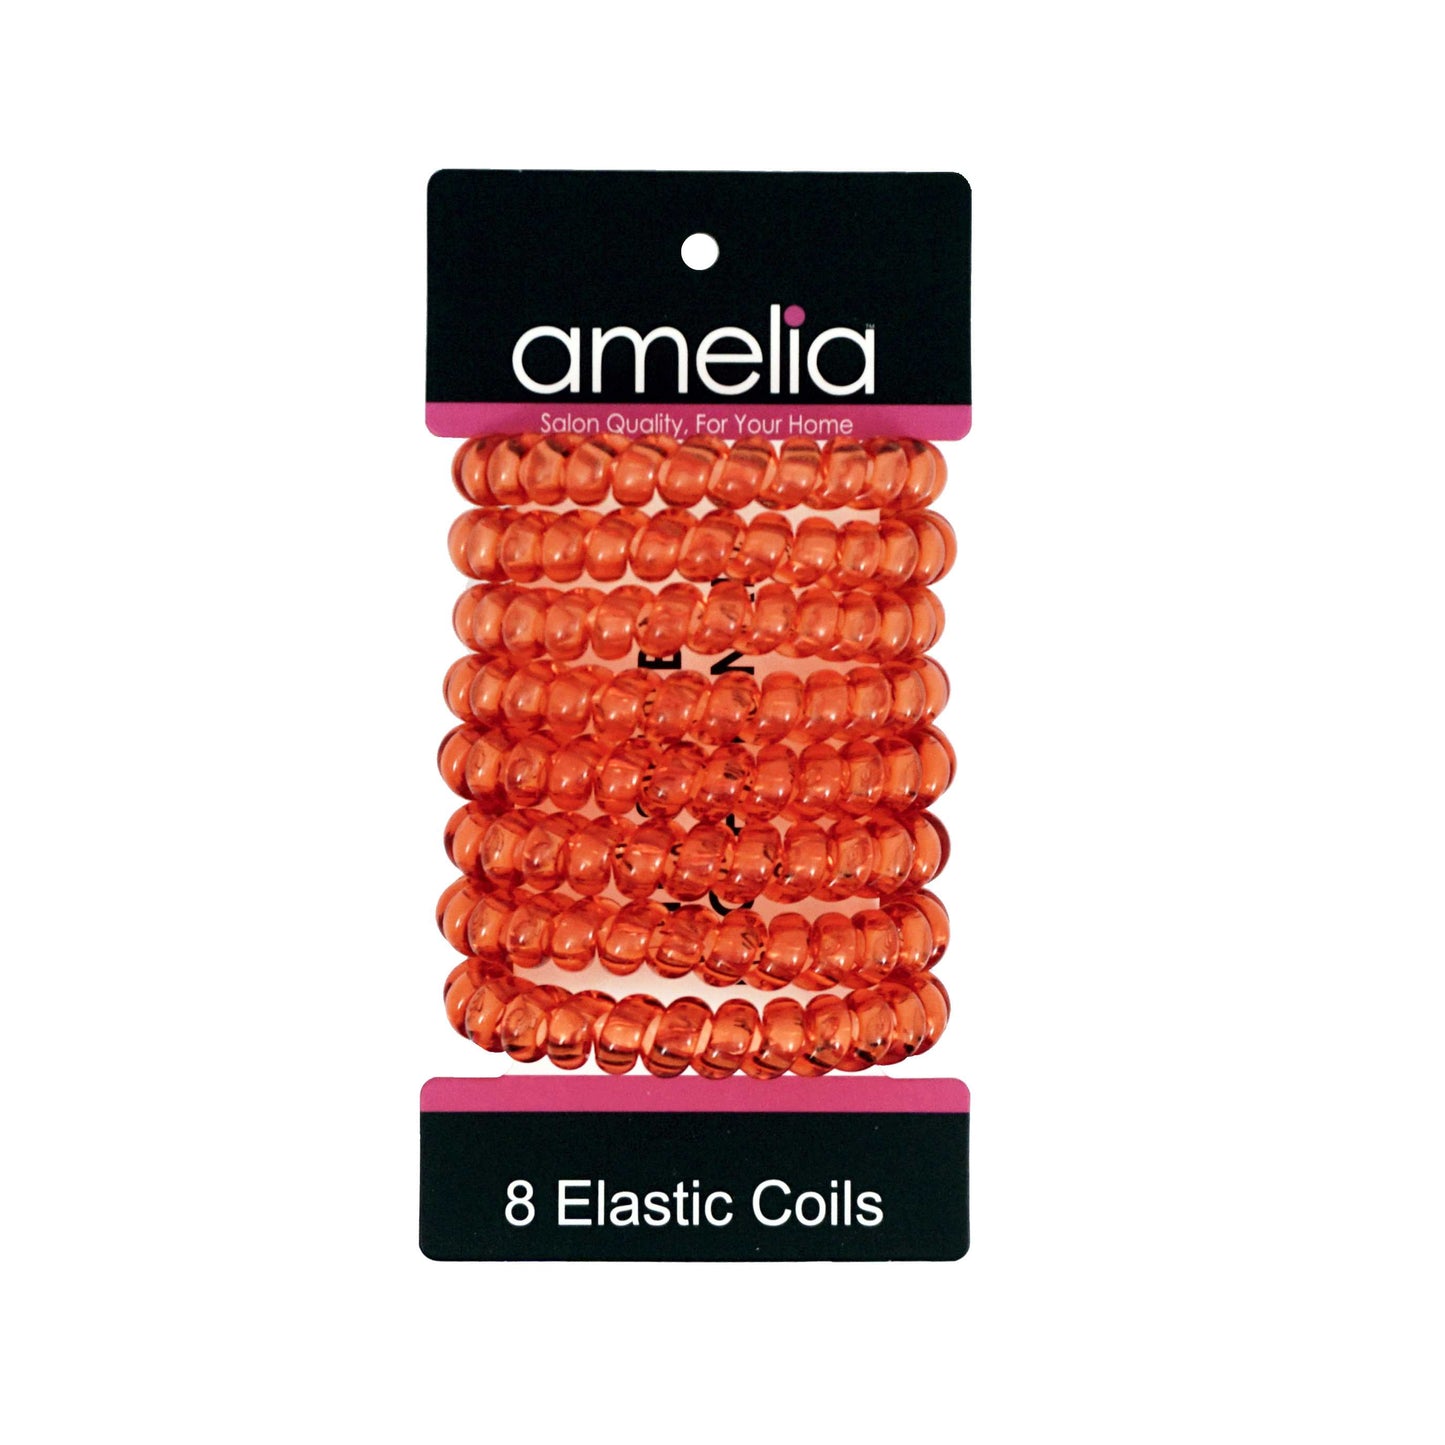 Amelia Beauty Products 8 Large Smooth Elastic Hair Coils, 2. 5in Diameter Thick Spiral Hair Ties, Gentle on Hair, Strong Hold and Minimizes Dents and Creases, Red